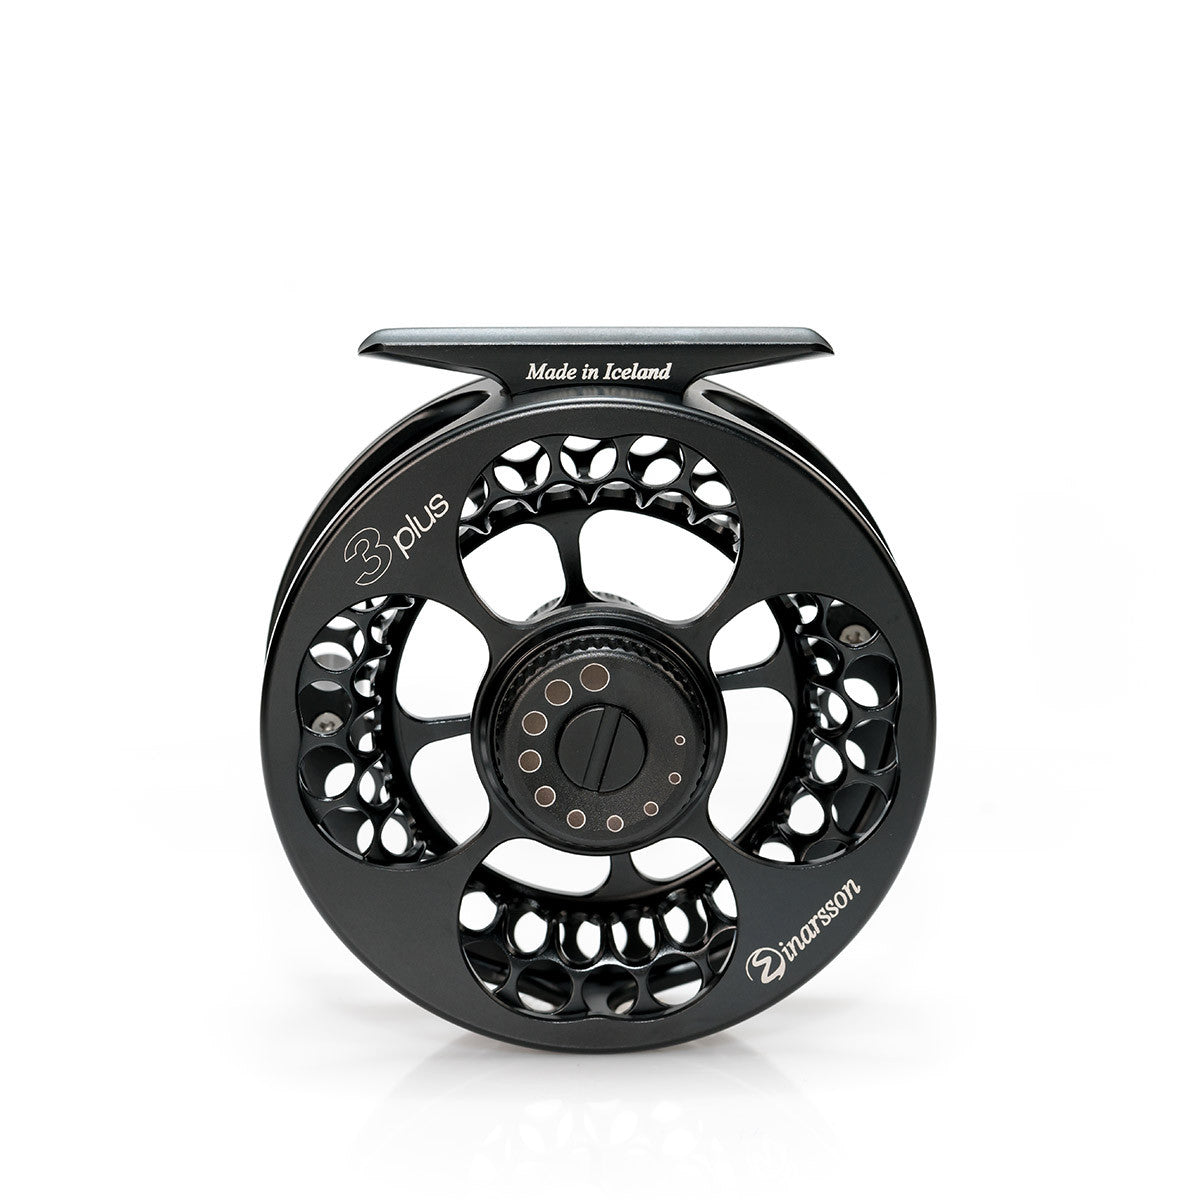 3Plus Fly Reel - Note: 3plus clear delivered with black drag and spool knobs